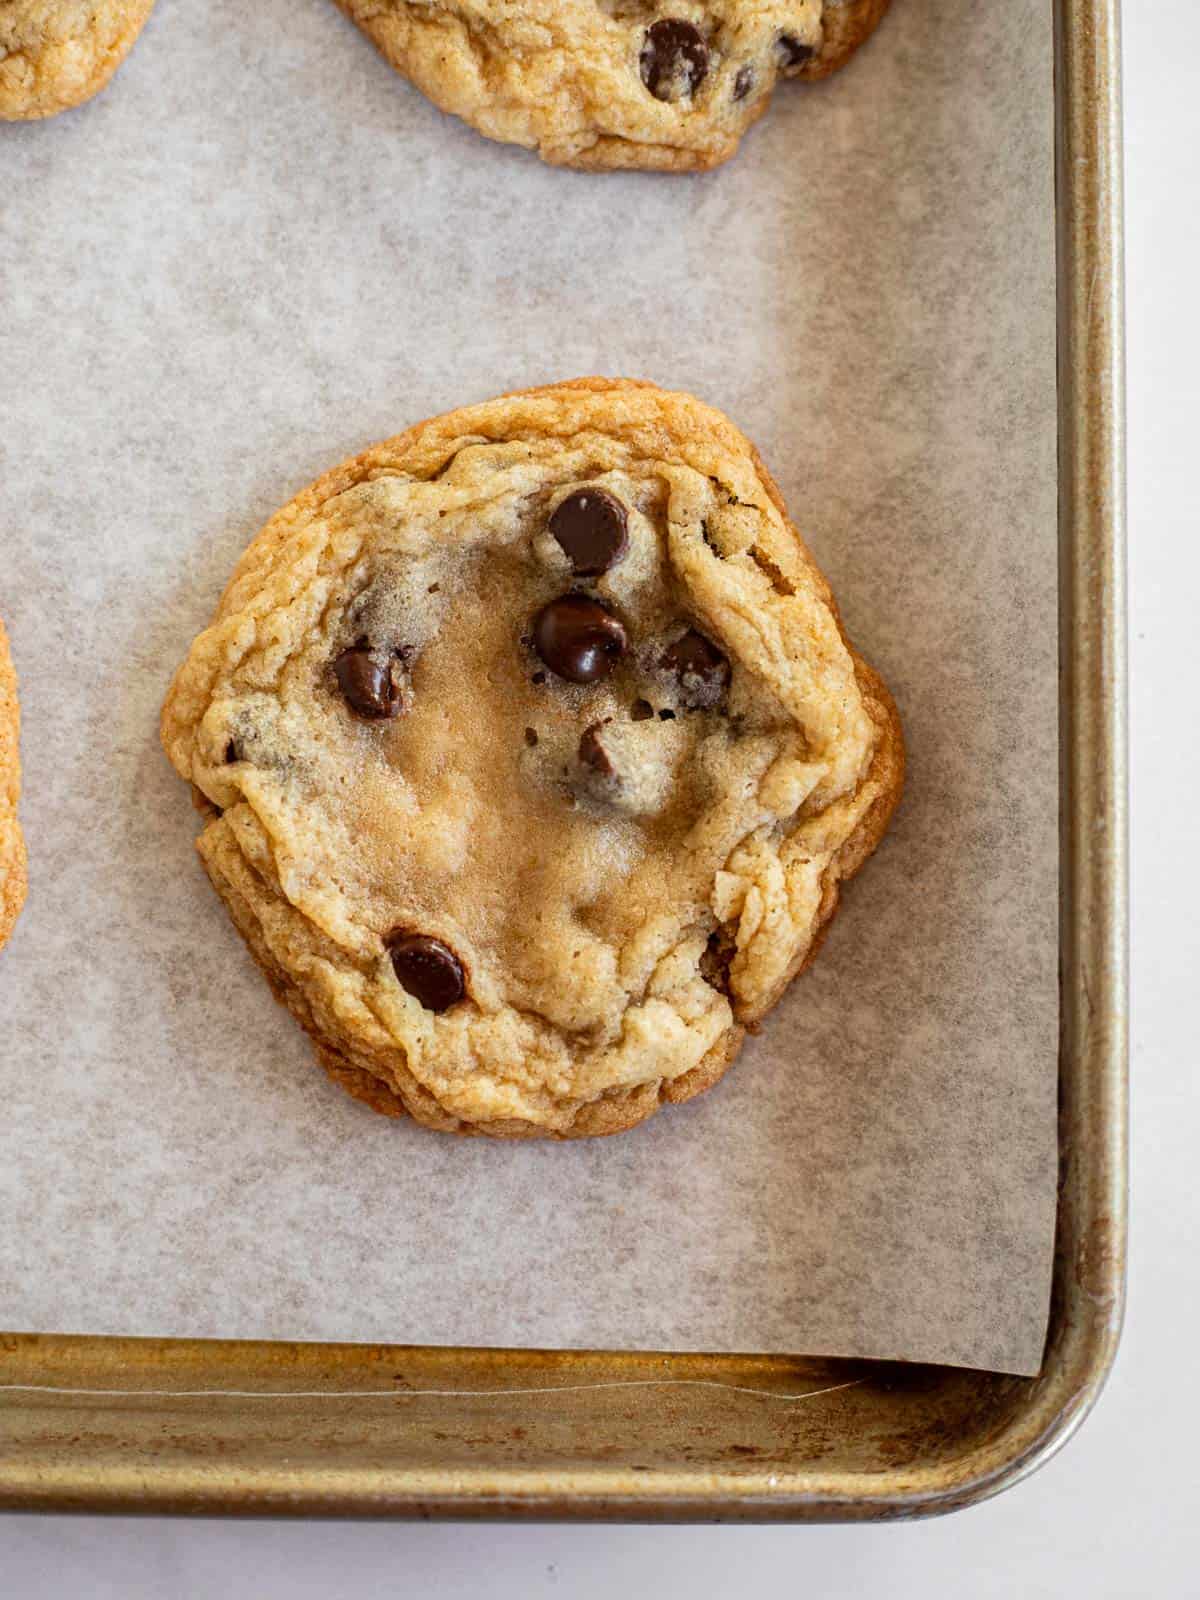 chocolate chip cookies baked in 15 minutes on parchment paper.